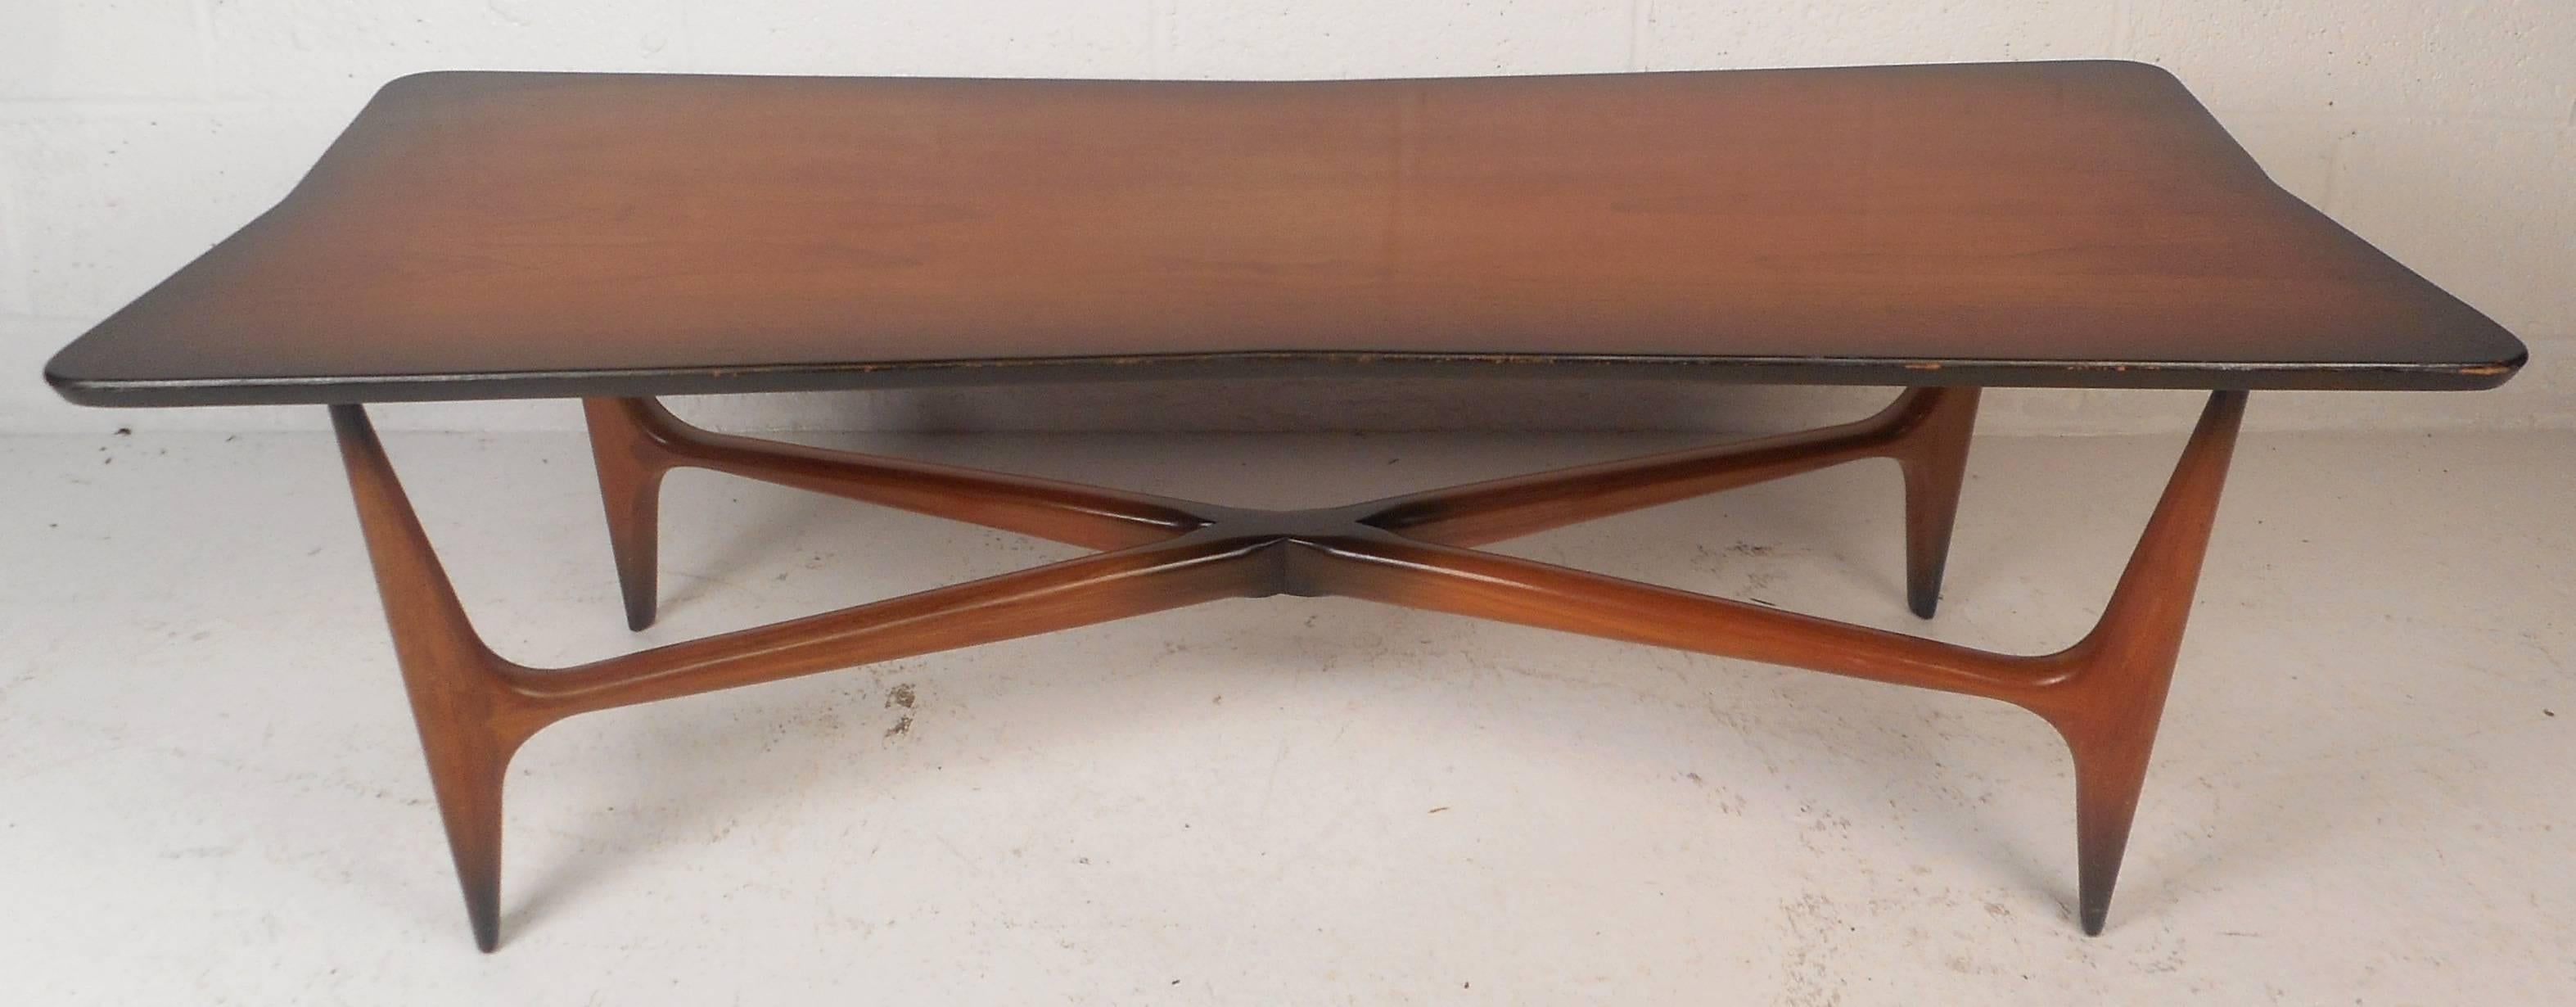 This beautiful vintage modern coffee table features a sculpted top with smooth edges. The unique design has stretchers running to each leg forming an "X" shape. The elegant shaped top sits on top of four tapered legs adding to the allure